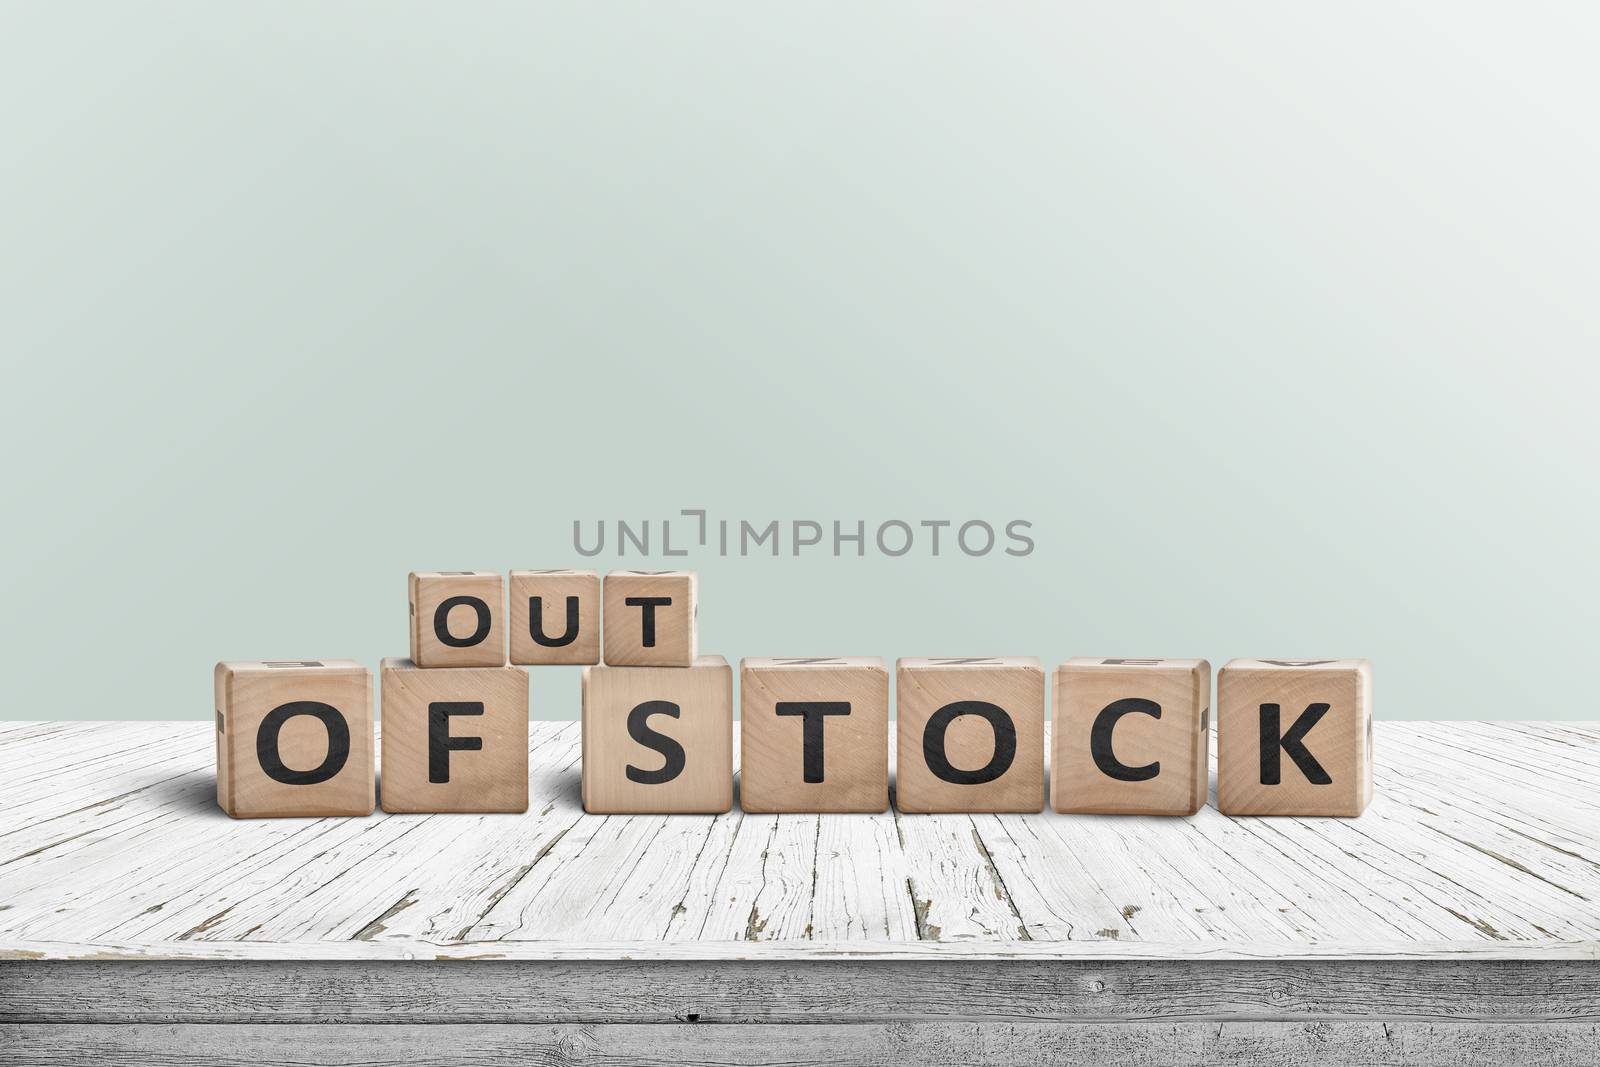 Out of stock sign standing on a wooden table with a green wall in the background